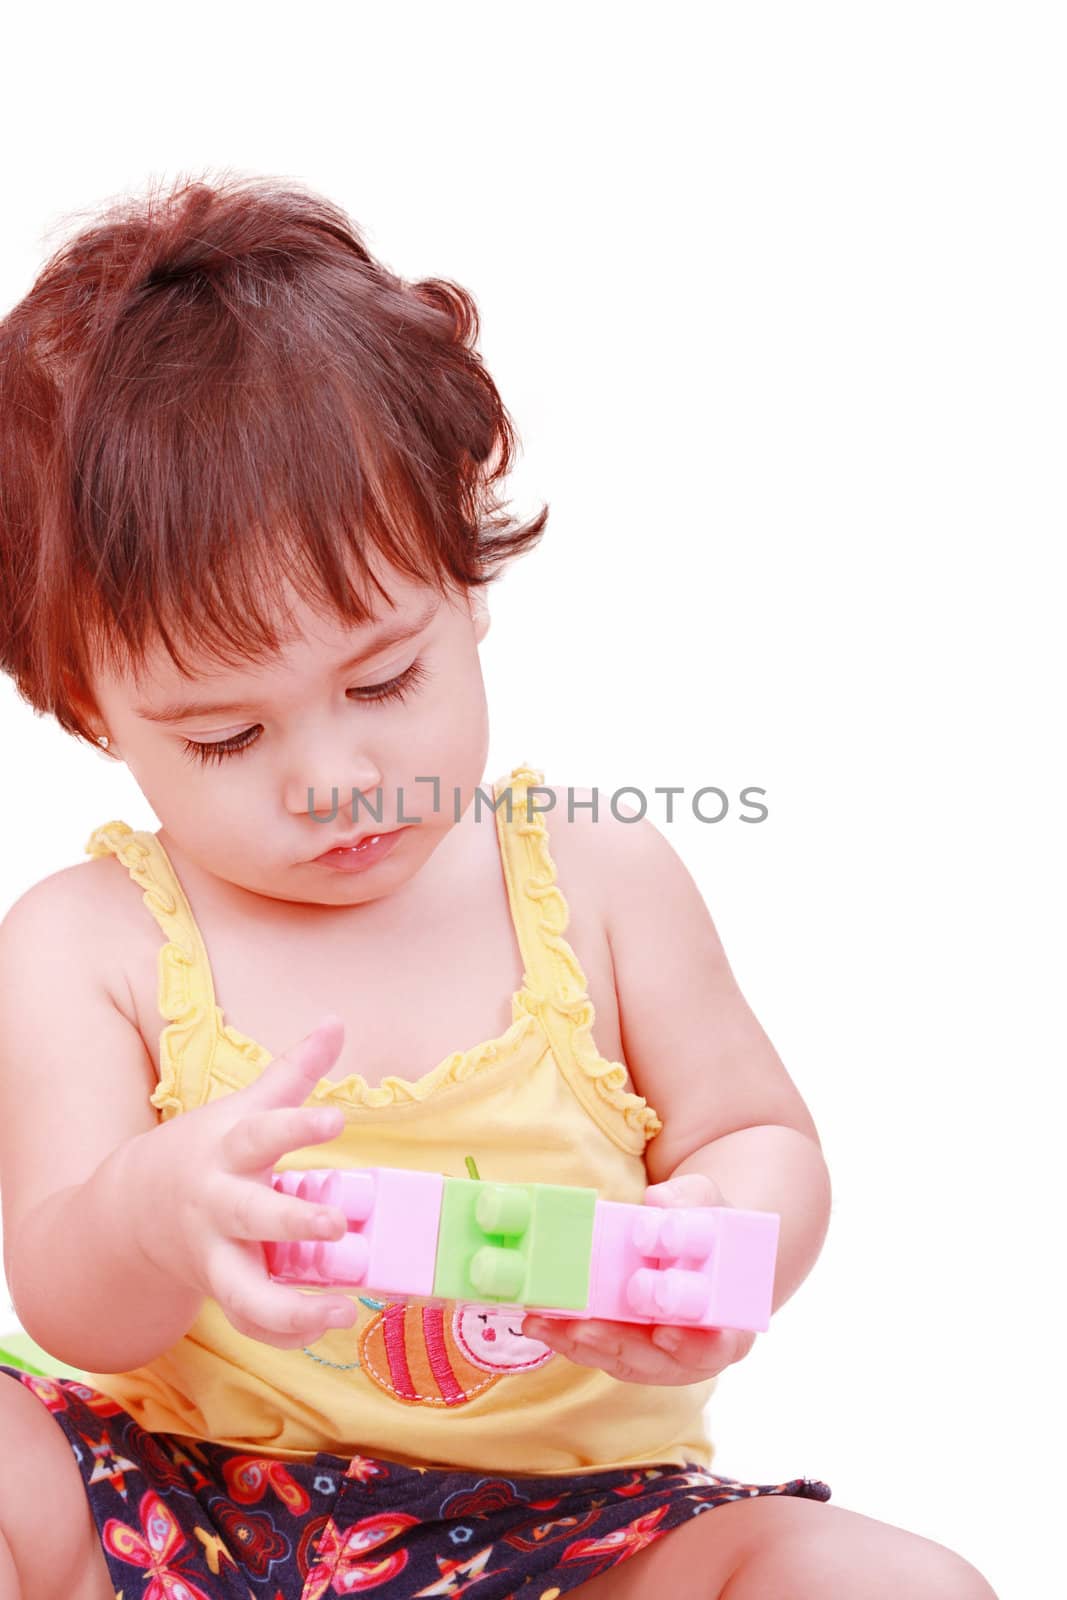 Baby in yellow shirt playing with toys by dacasdo